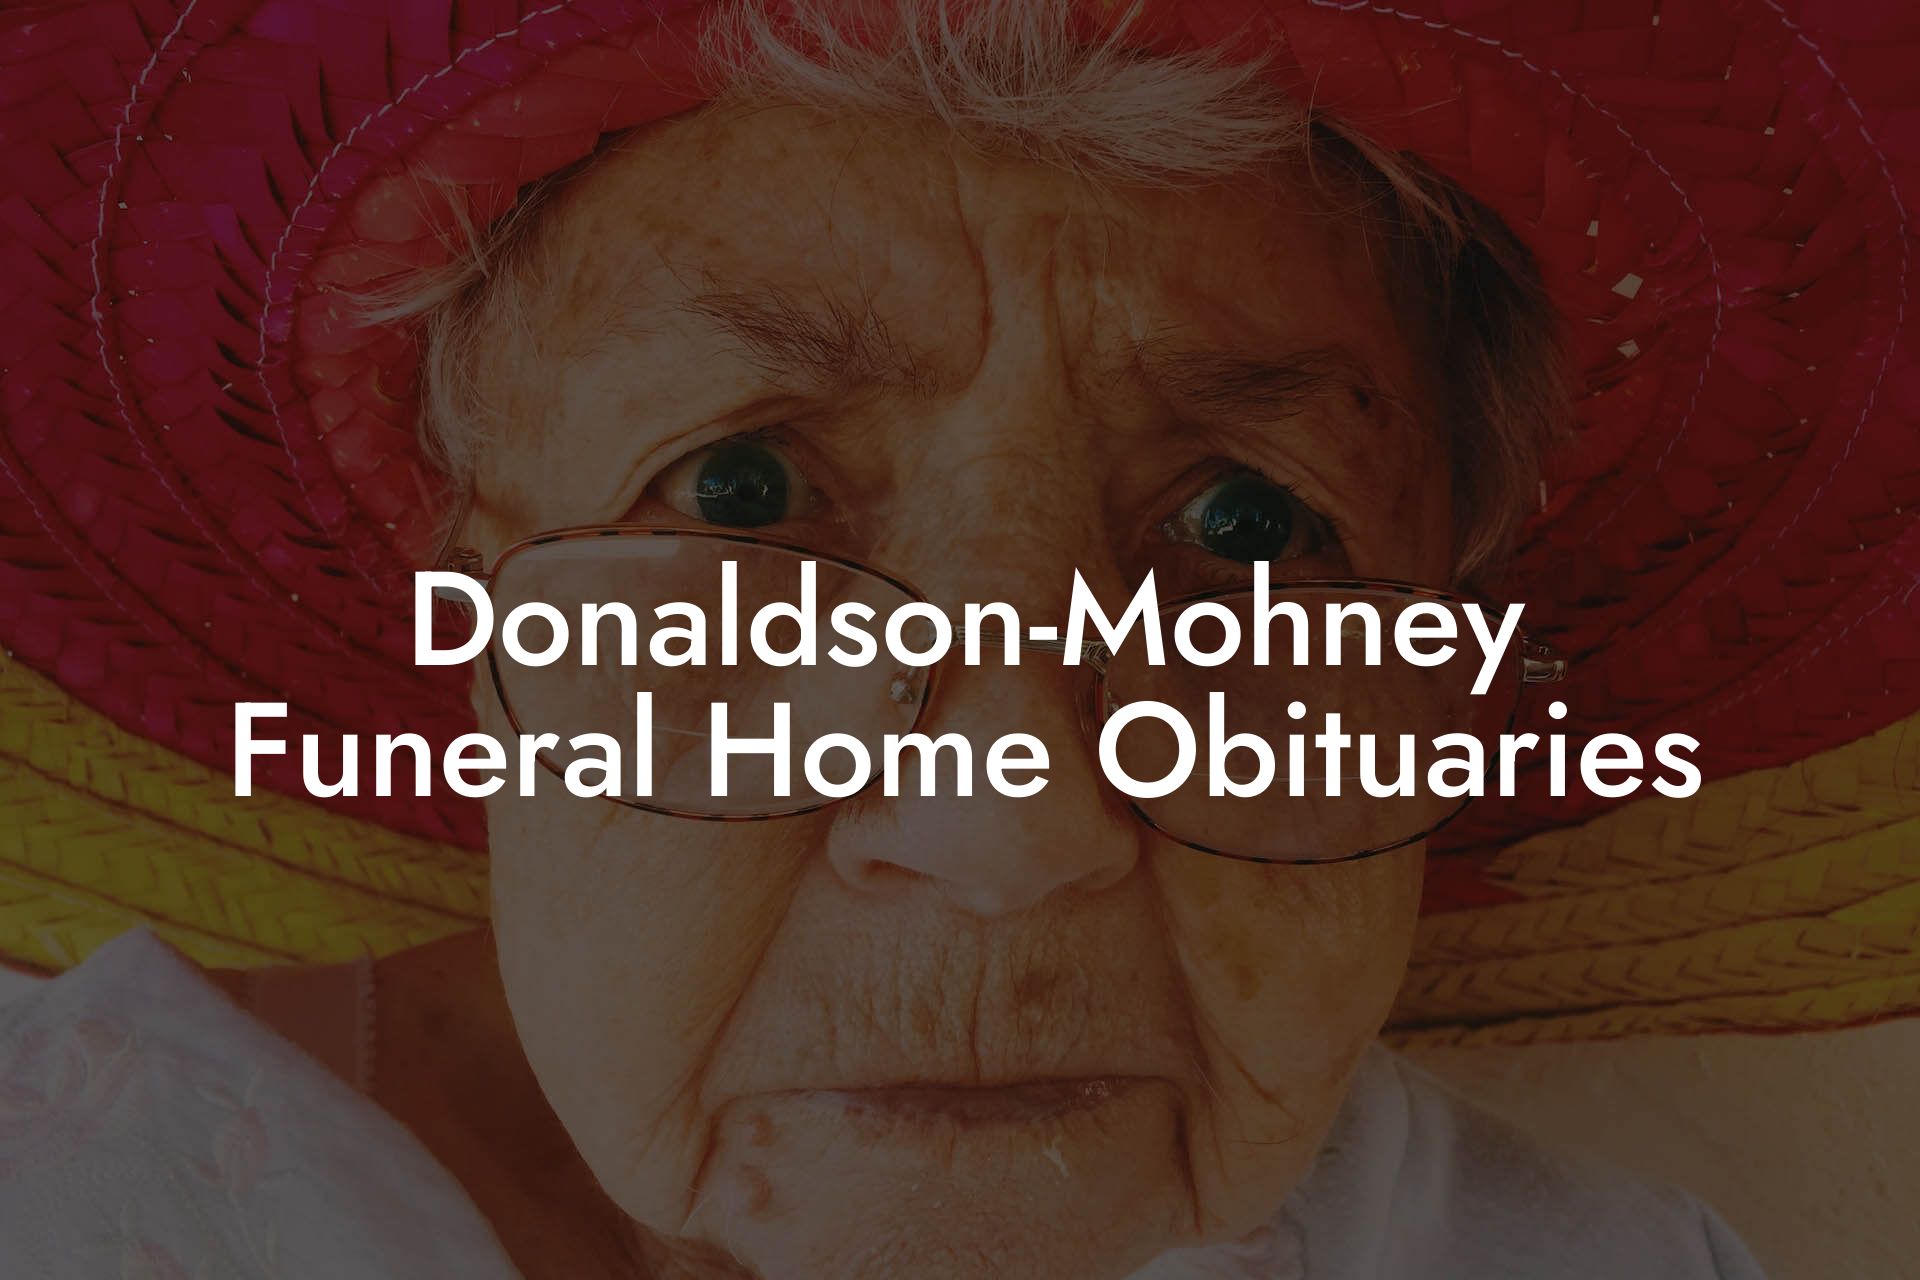 Donaldson-Mohney Funeral Home Obituaries